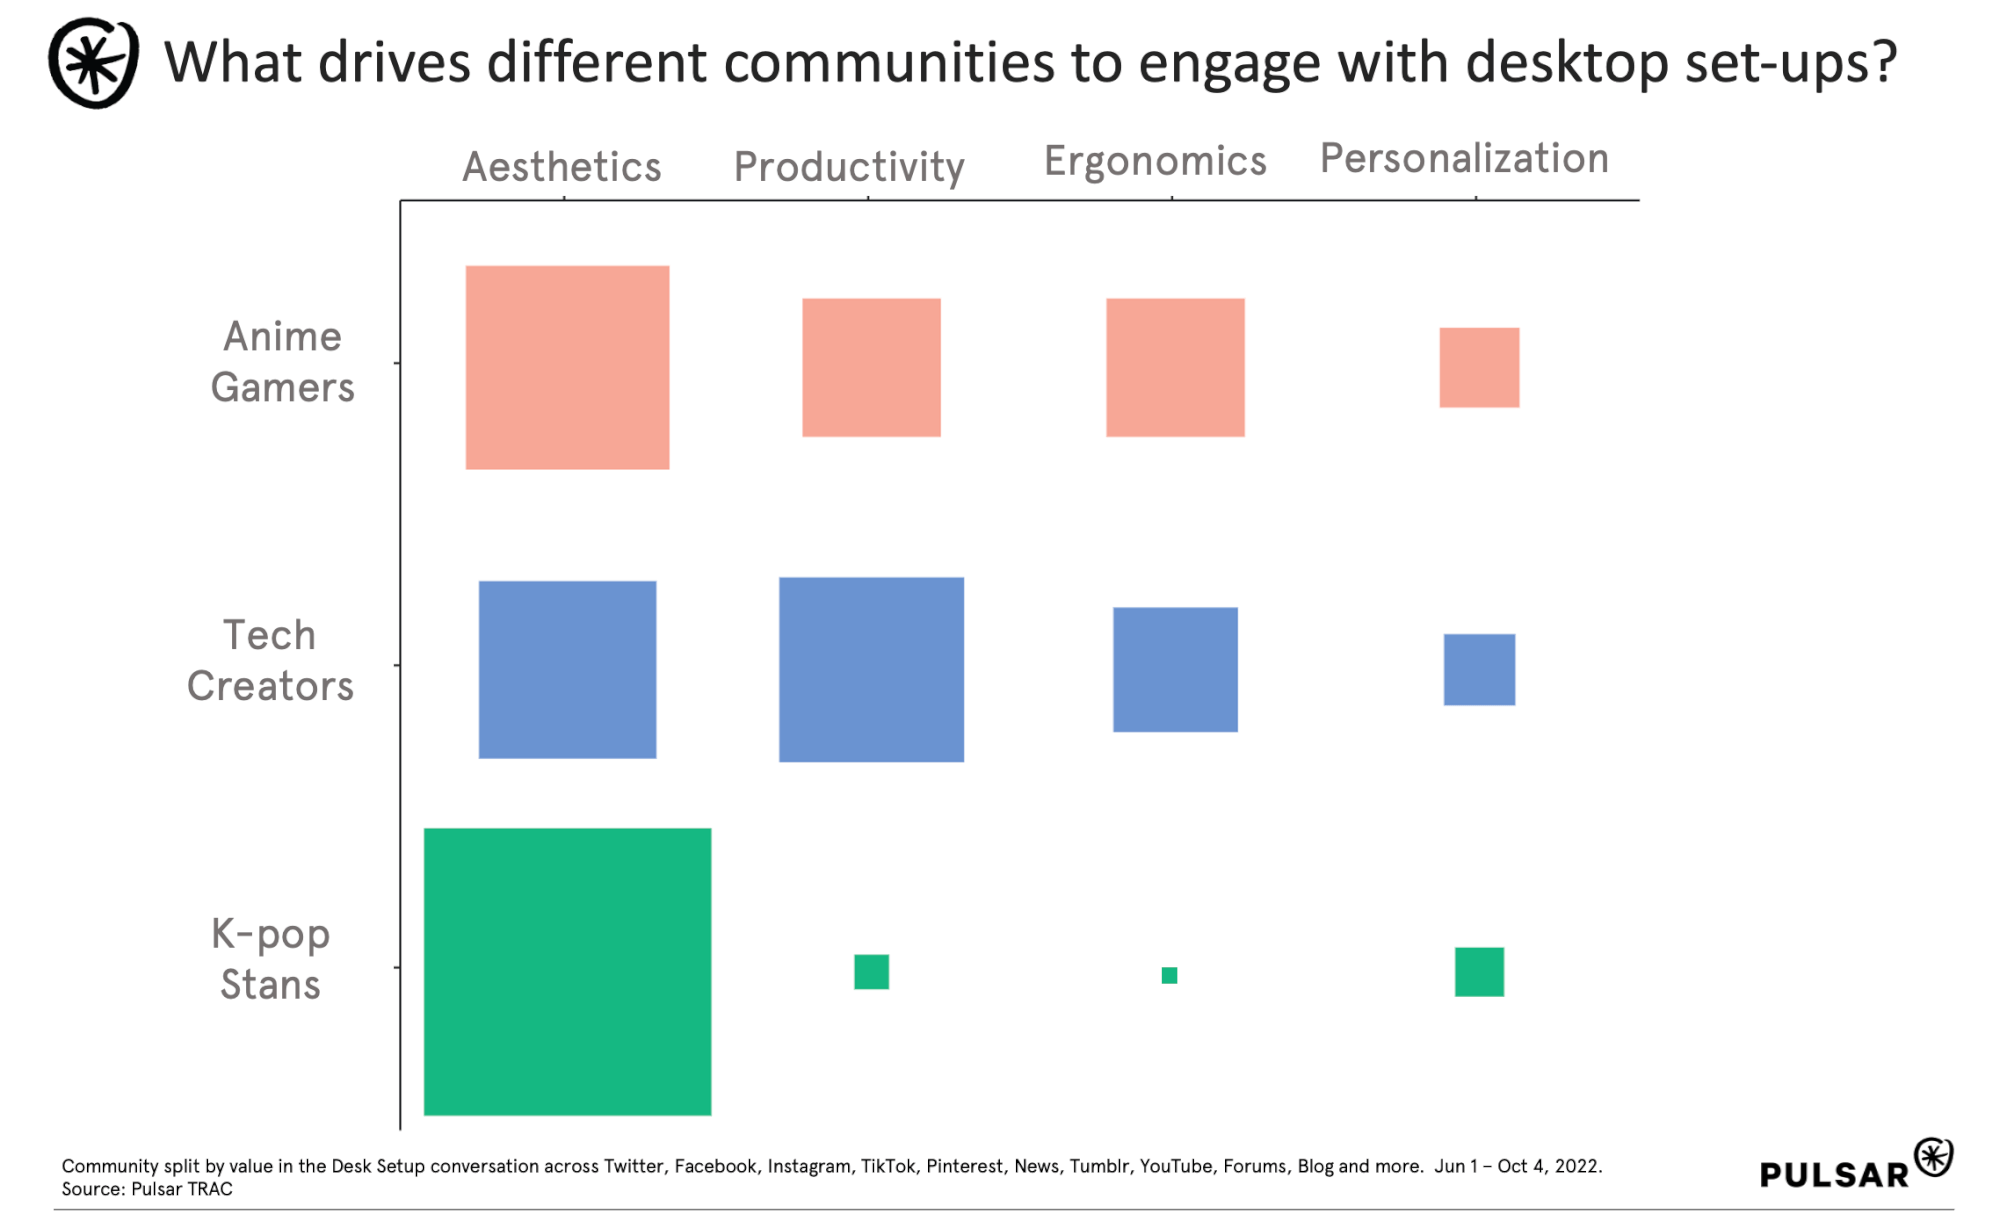 What drives different communities to engage with desktop set-ups?